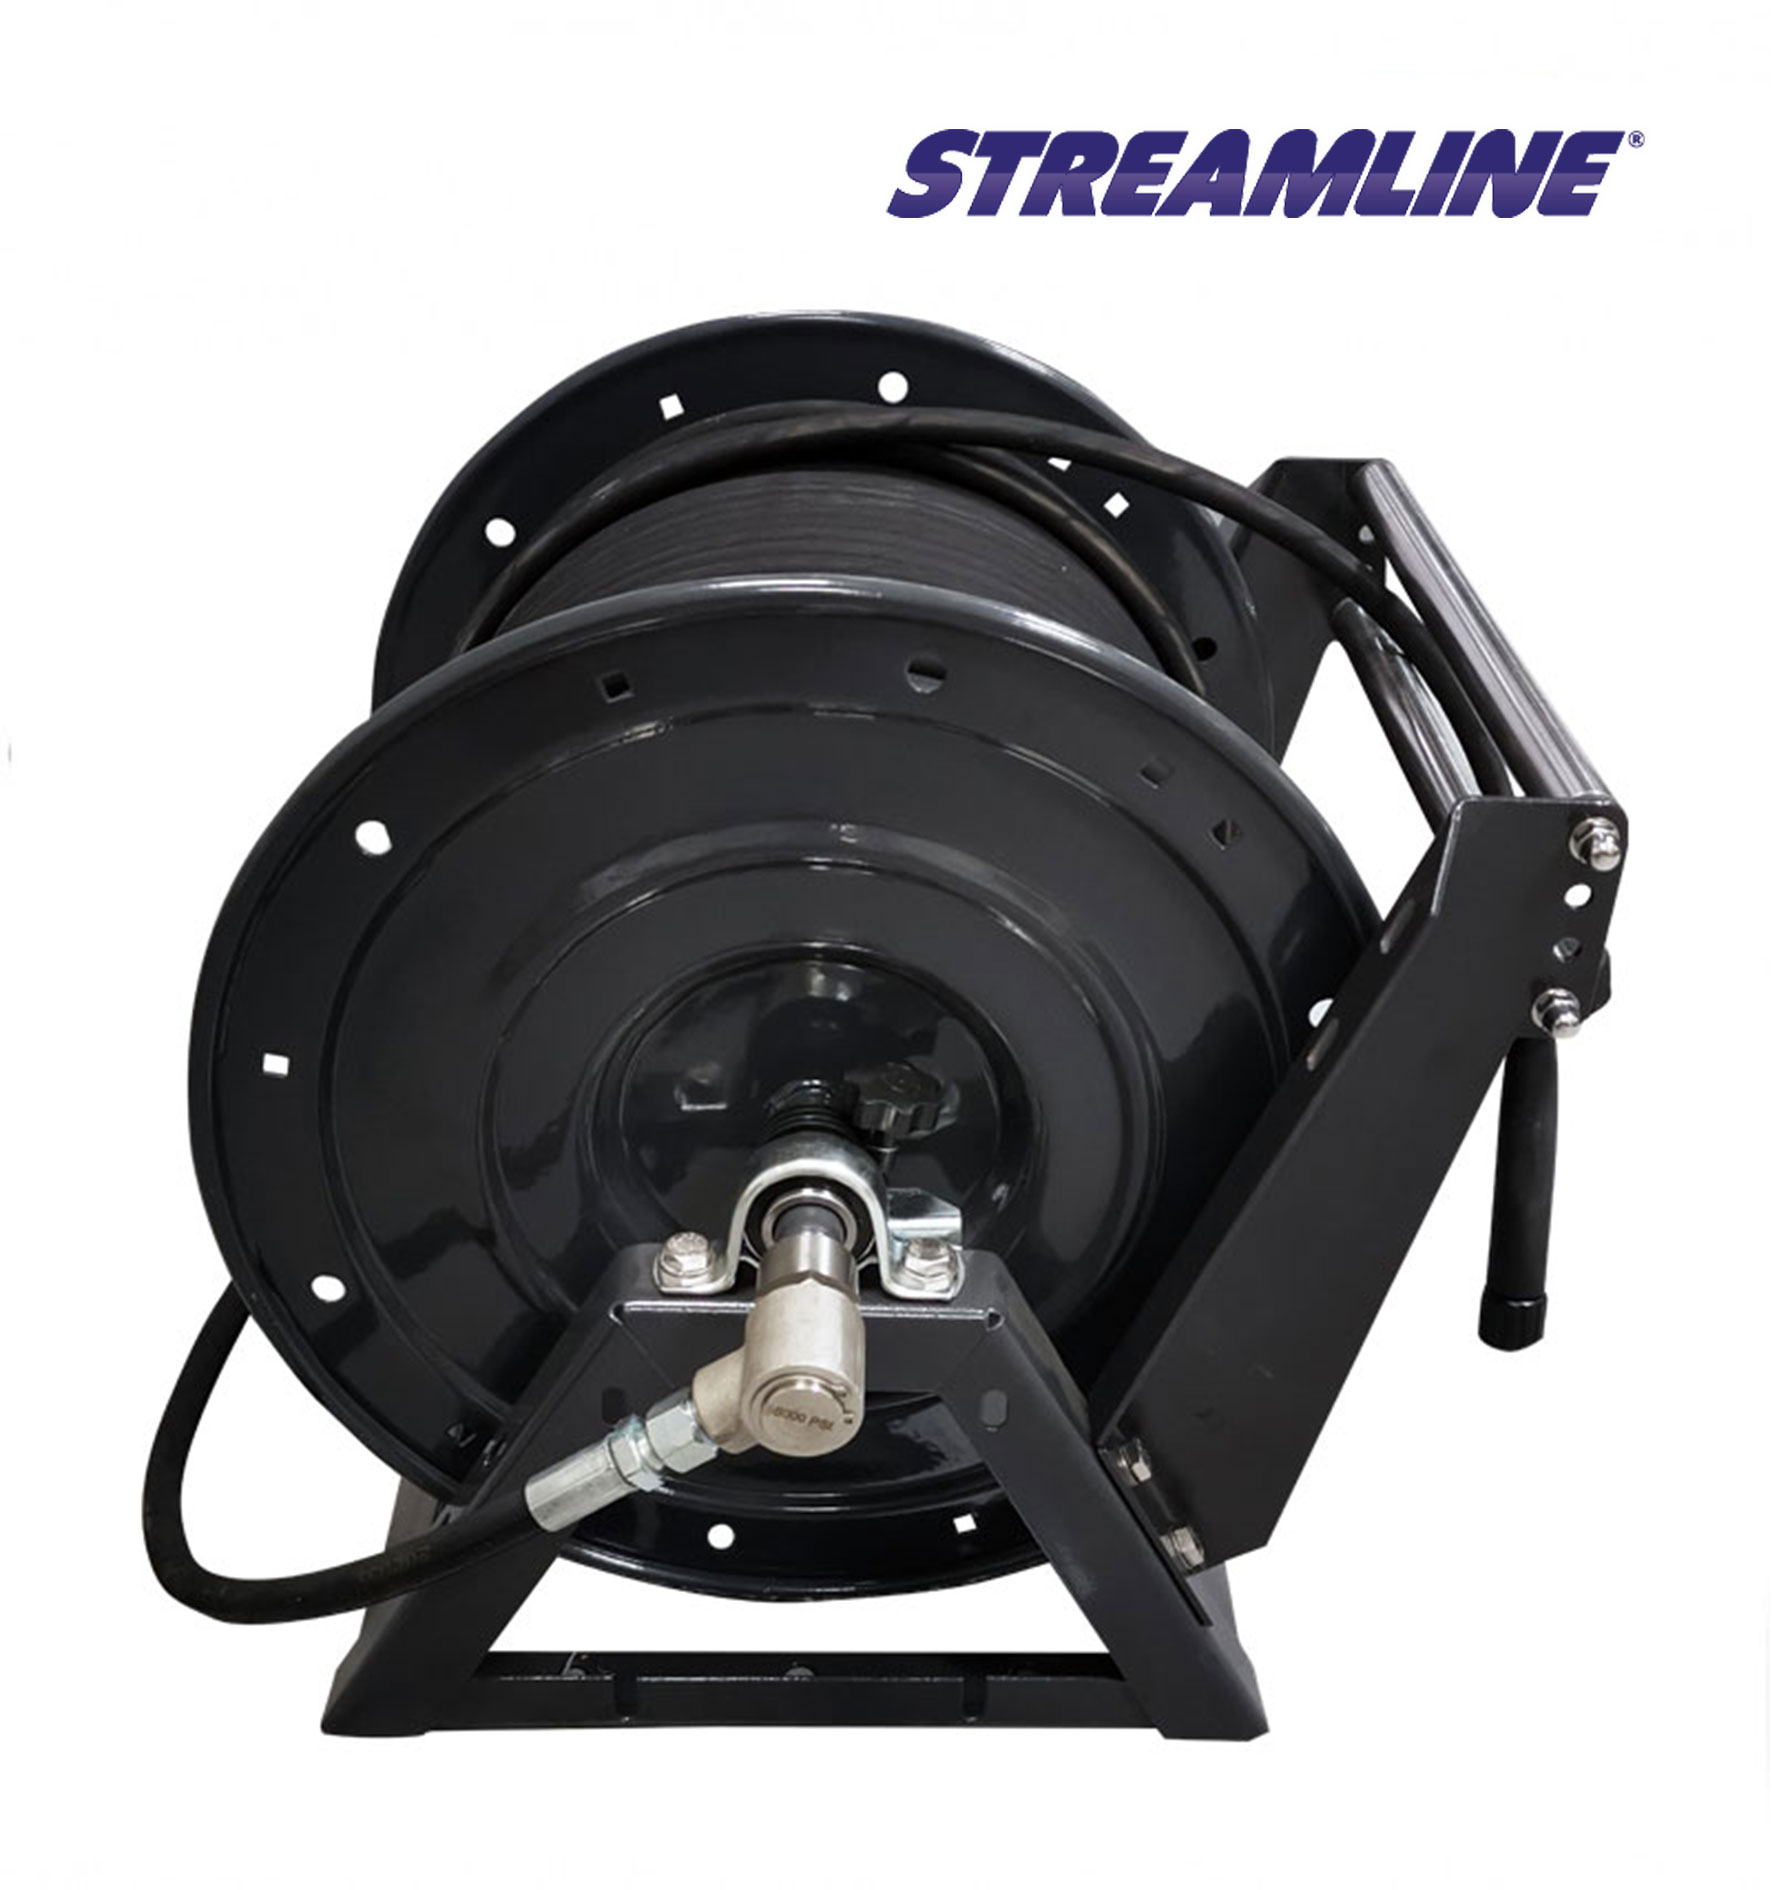 Hose Reel High Pressure 300' x 3/8 inch - A-frame type with Hose